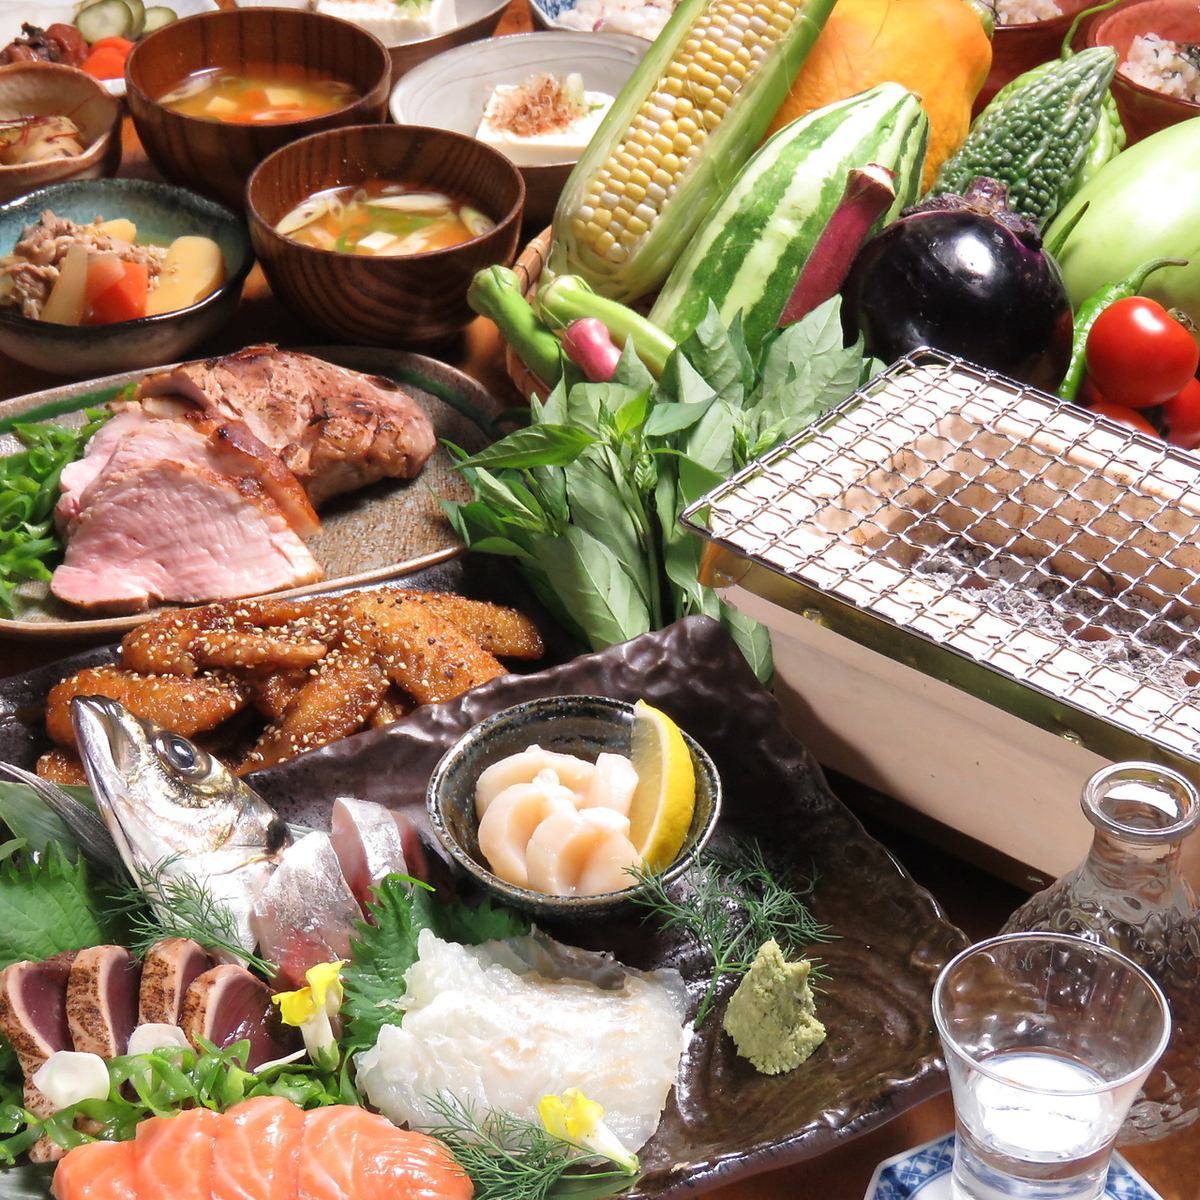 We also offer healthy sake and healthy dinners using vegetables and fruits that are particular about pesticide-free ♪